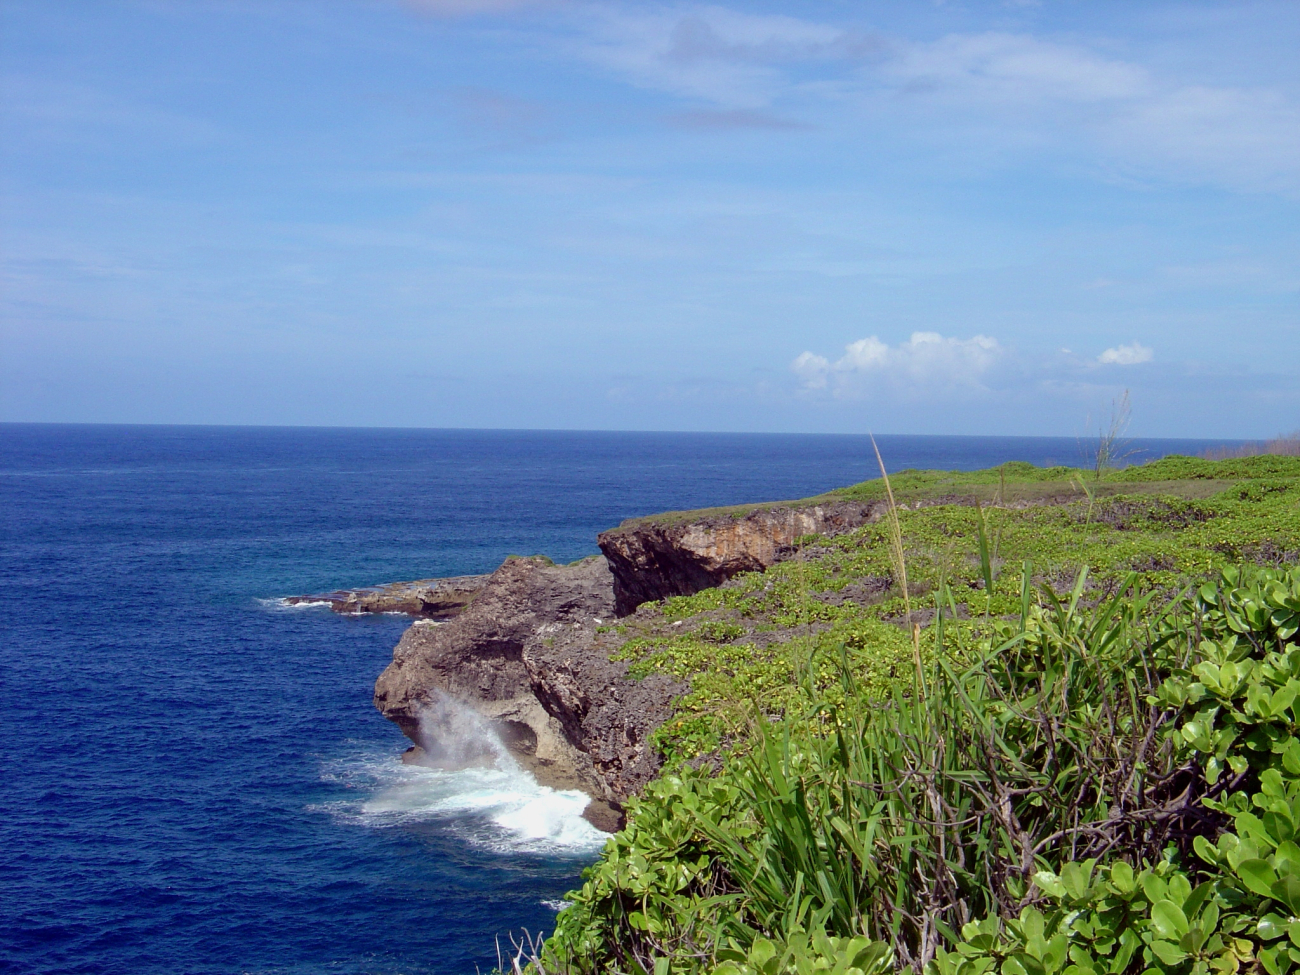 Banzai Cliff Monument in honor of those who committed suicide here during theWWII Battle of Saipan